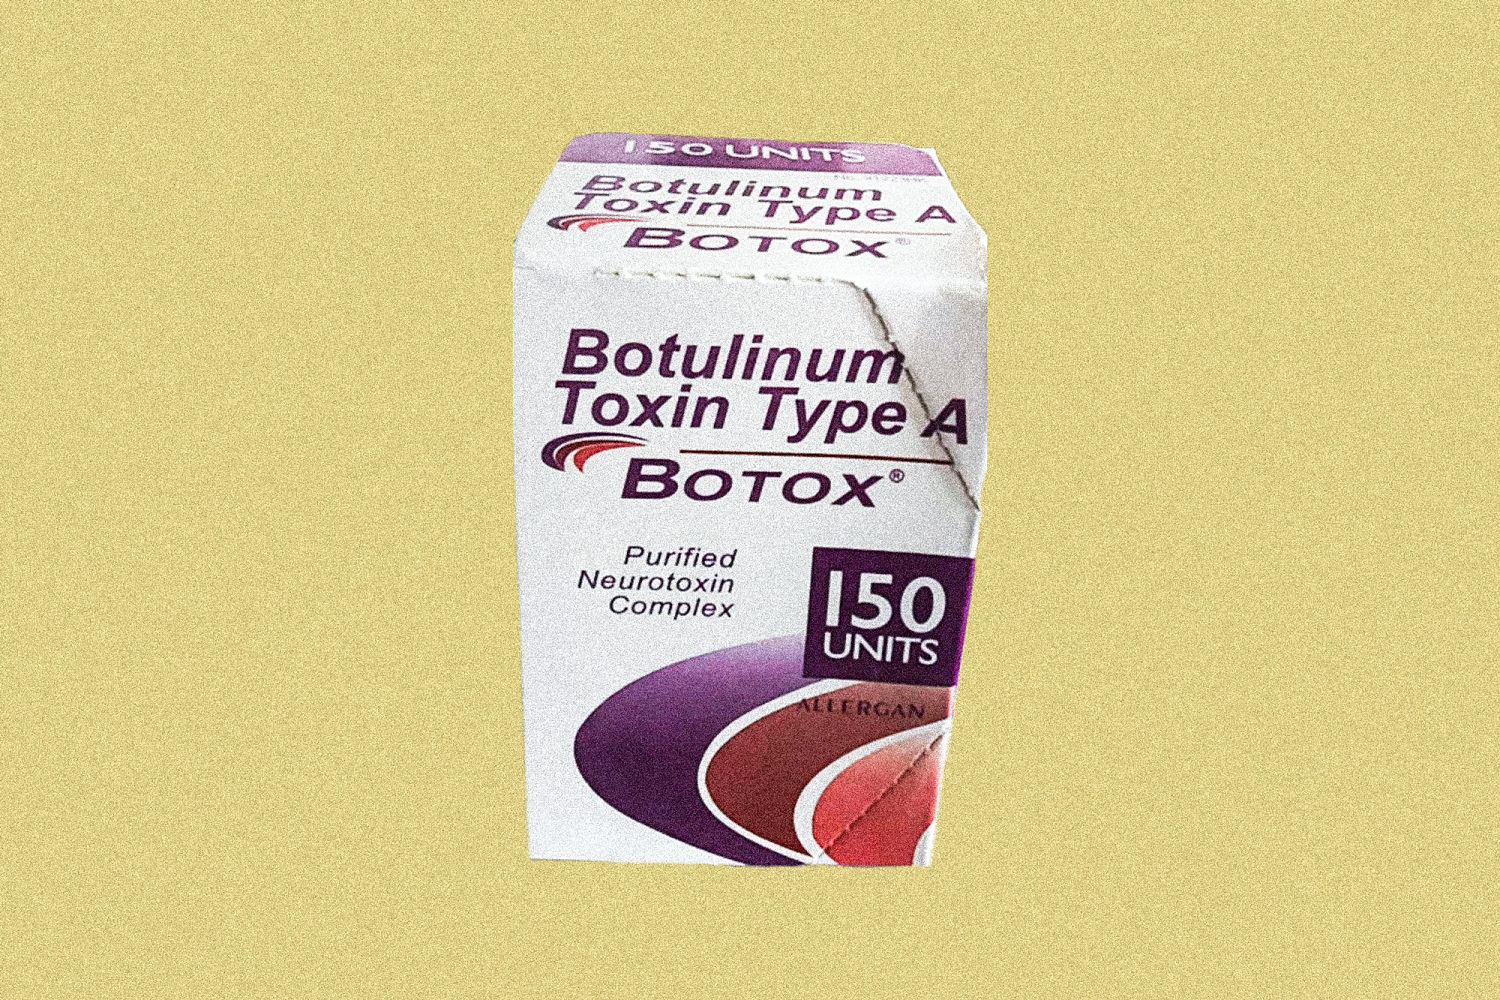 New York City reports hospitalizations caused by fake Botox. Where is the 'faux-tox' coming from?